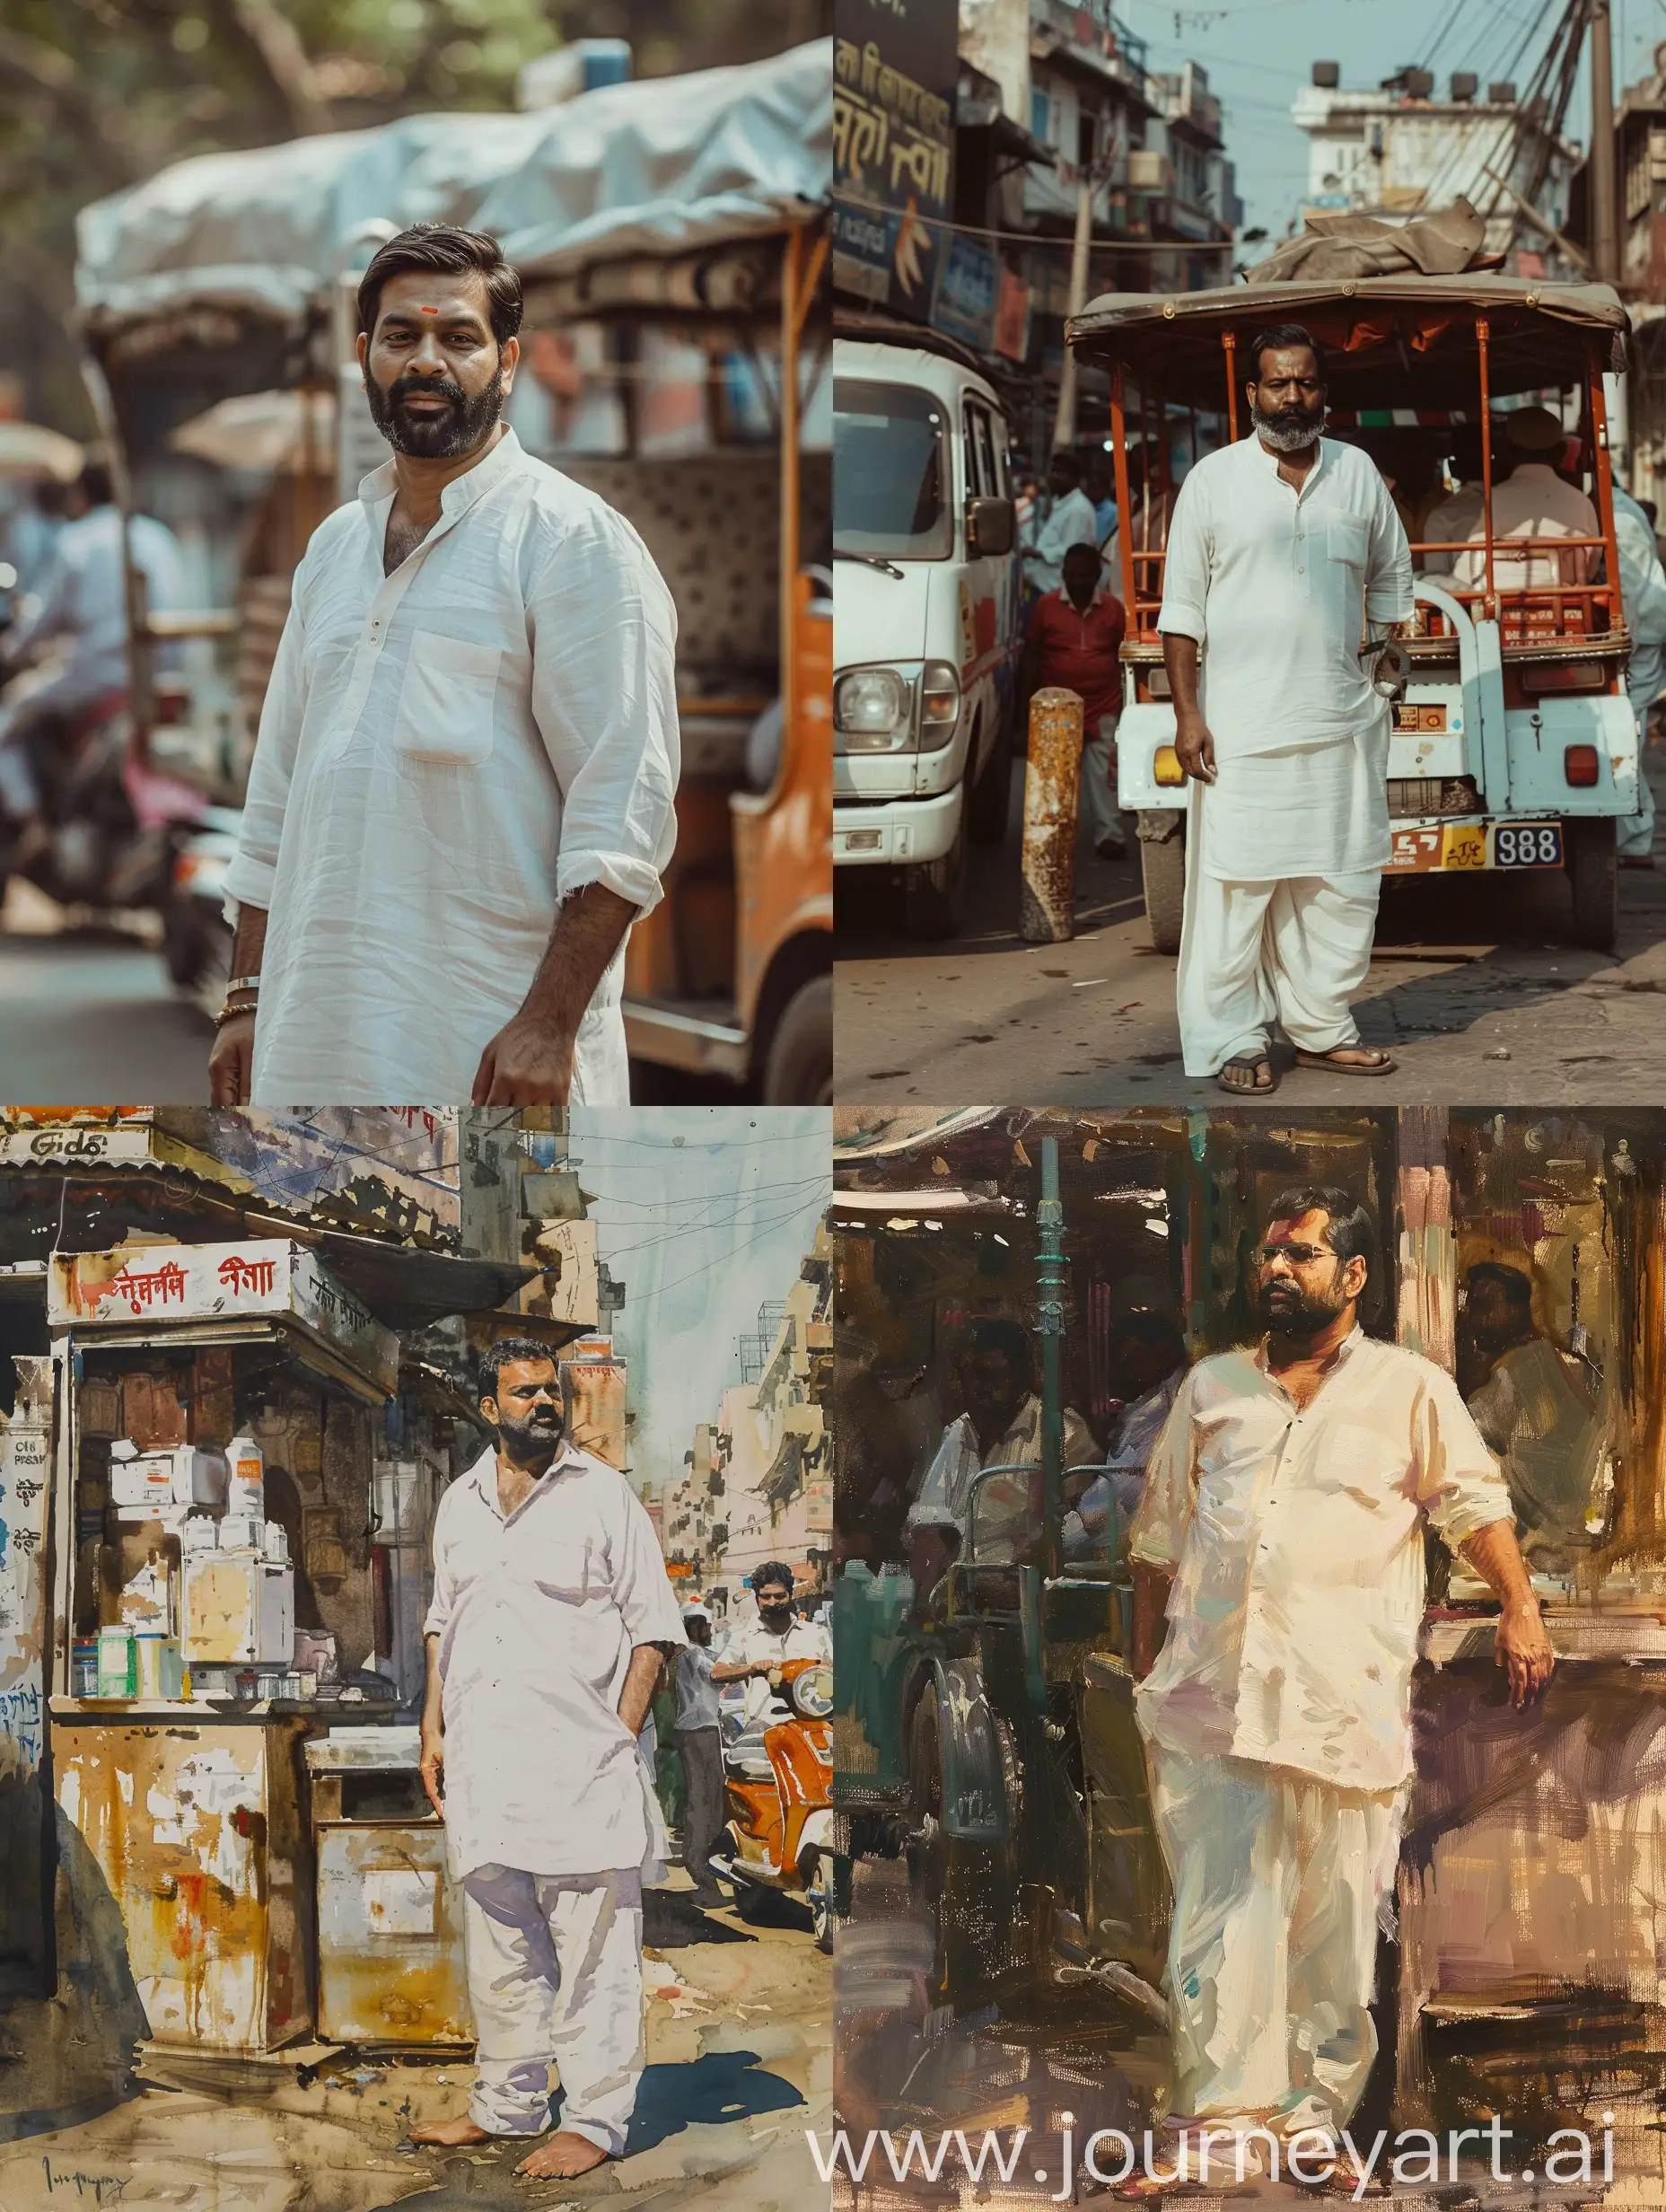 Maharashtra chief minister Eknath shinde wearing a white shirt and pant standing in front of the Autorickshaw stand, soft, muted tones
s, close up, wavy, --ar 36:55 --stylize 750 --v 6